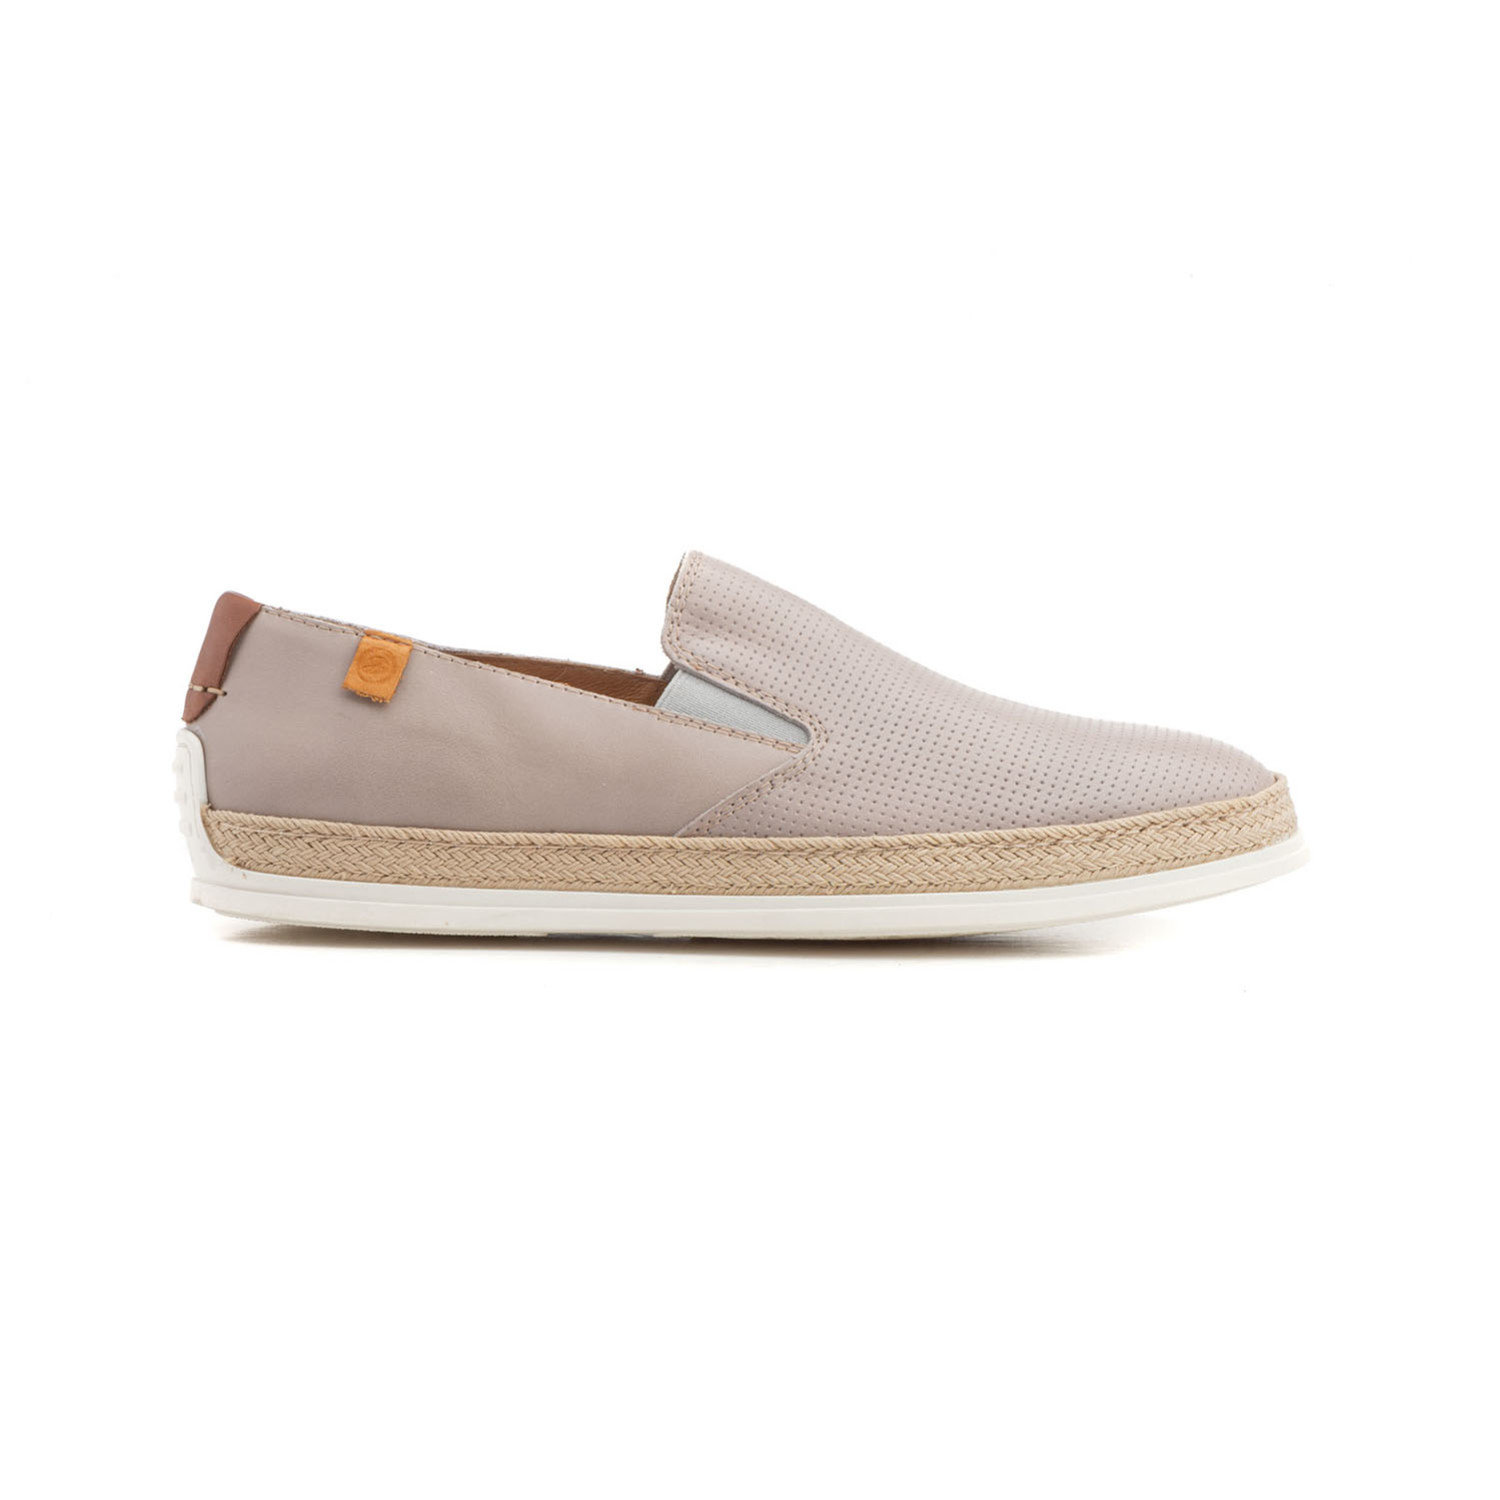 Elal Serie Diluis Slip-On Shoes // Gray (Euro: 40) - Diluis PERMANENT ...